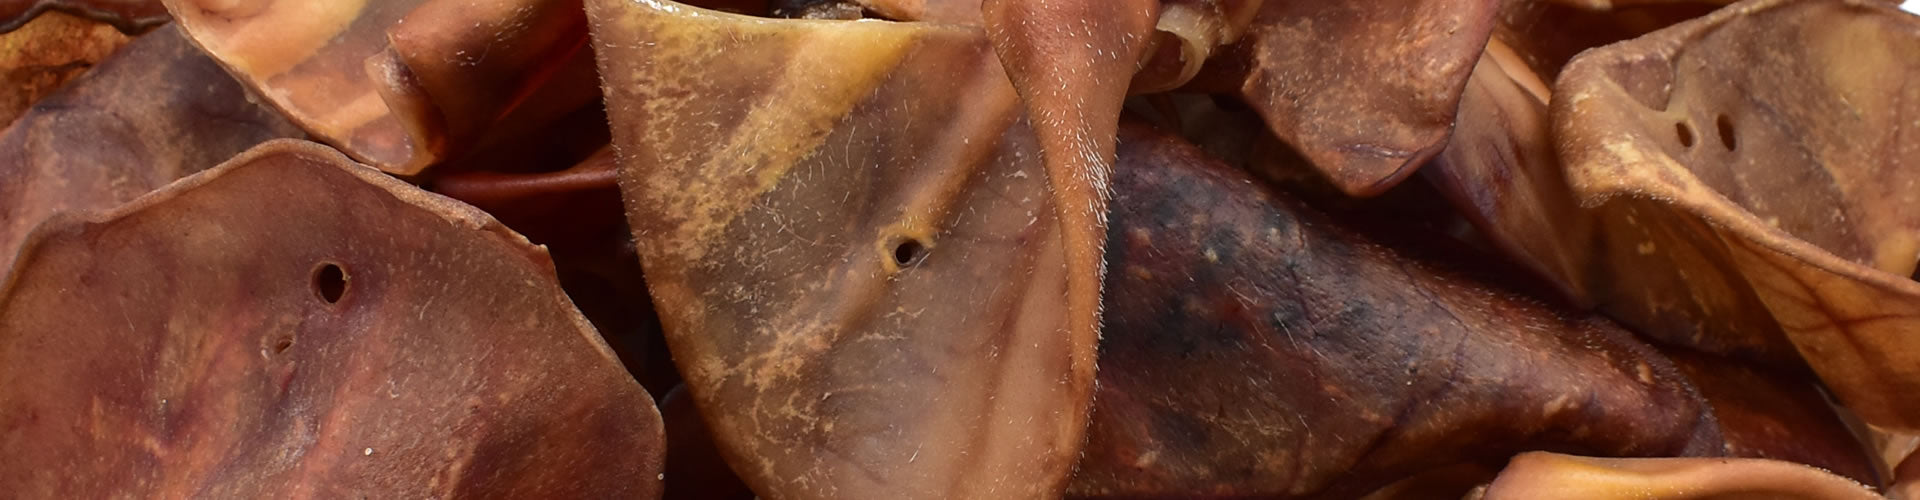 Delicious Pigs ears